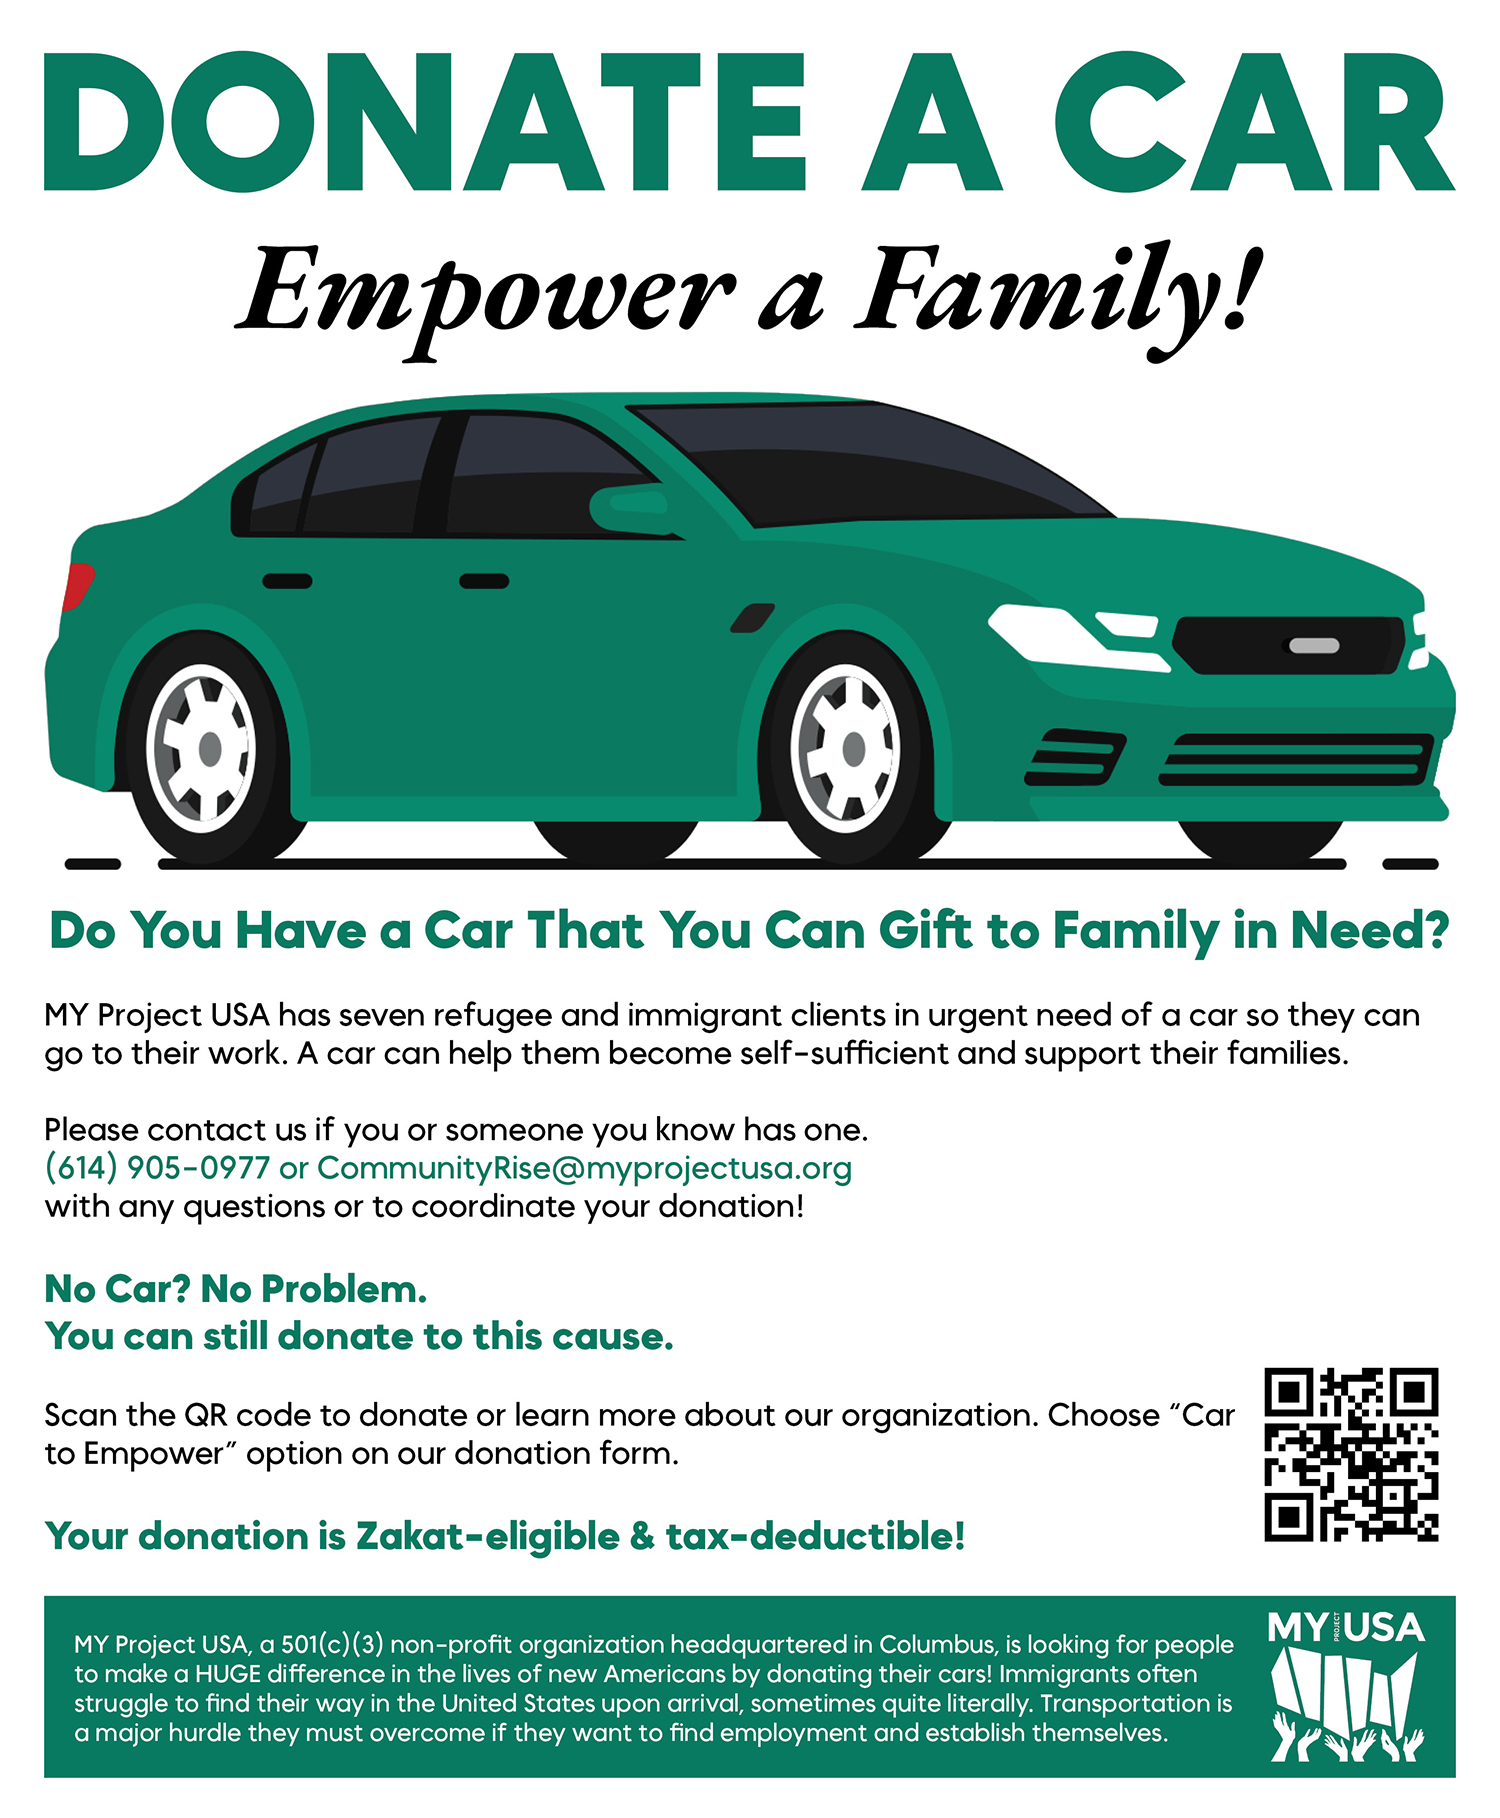 DONATE A CAREmpower a Family!Do You Have a Car That You Can Gift to Family in Need?MY Project USA has several refugee and immigrant clients in urgent need of a car so they can go to their work. A car can help them become self-sufficient and support their families. Please contact us if you or someone you know has one.(614) 905-0977 or CommunityRise@myprojectusa.orgwith any questions or to coordinate your donation! No Car? No Problem.You can still donate to this cause. Visit MYProjectUSA.org/donors.Your donation is Zakat-eligible & tax-deductible!